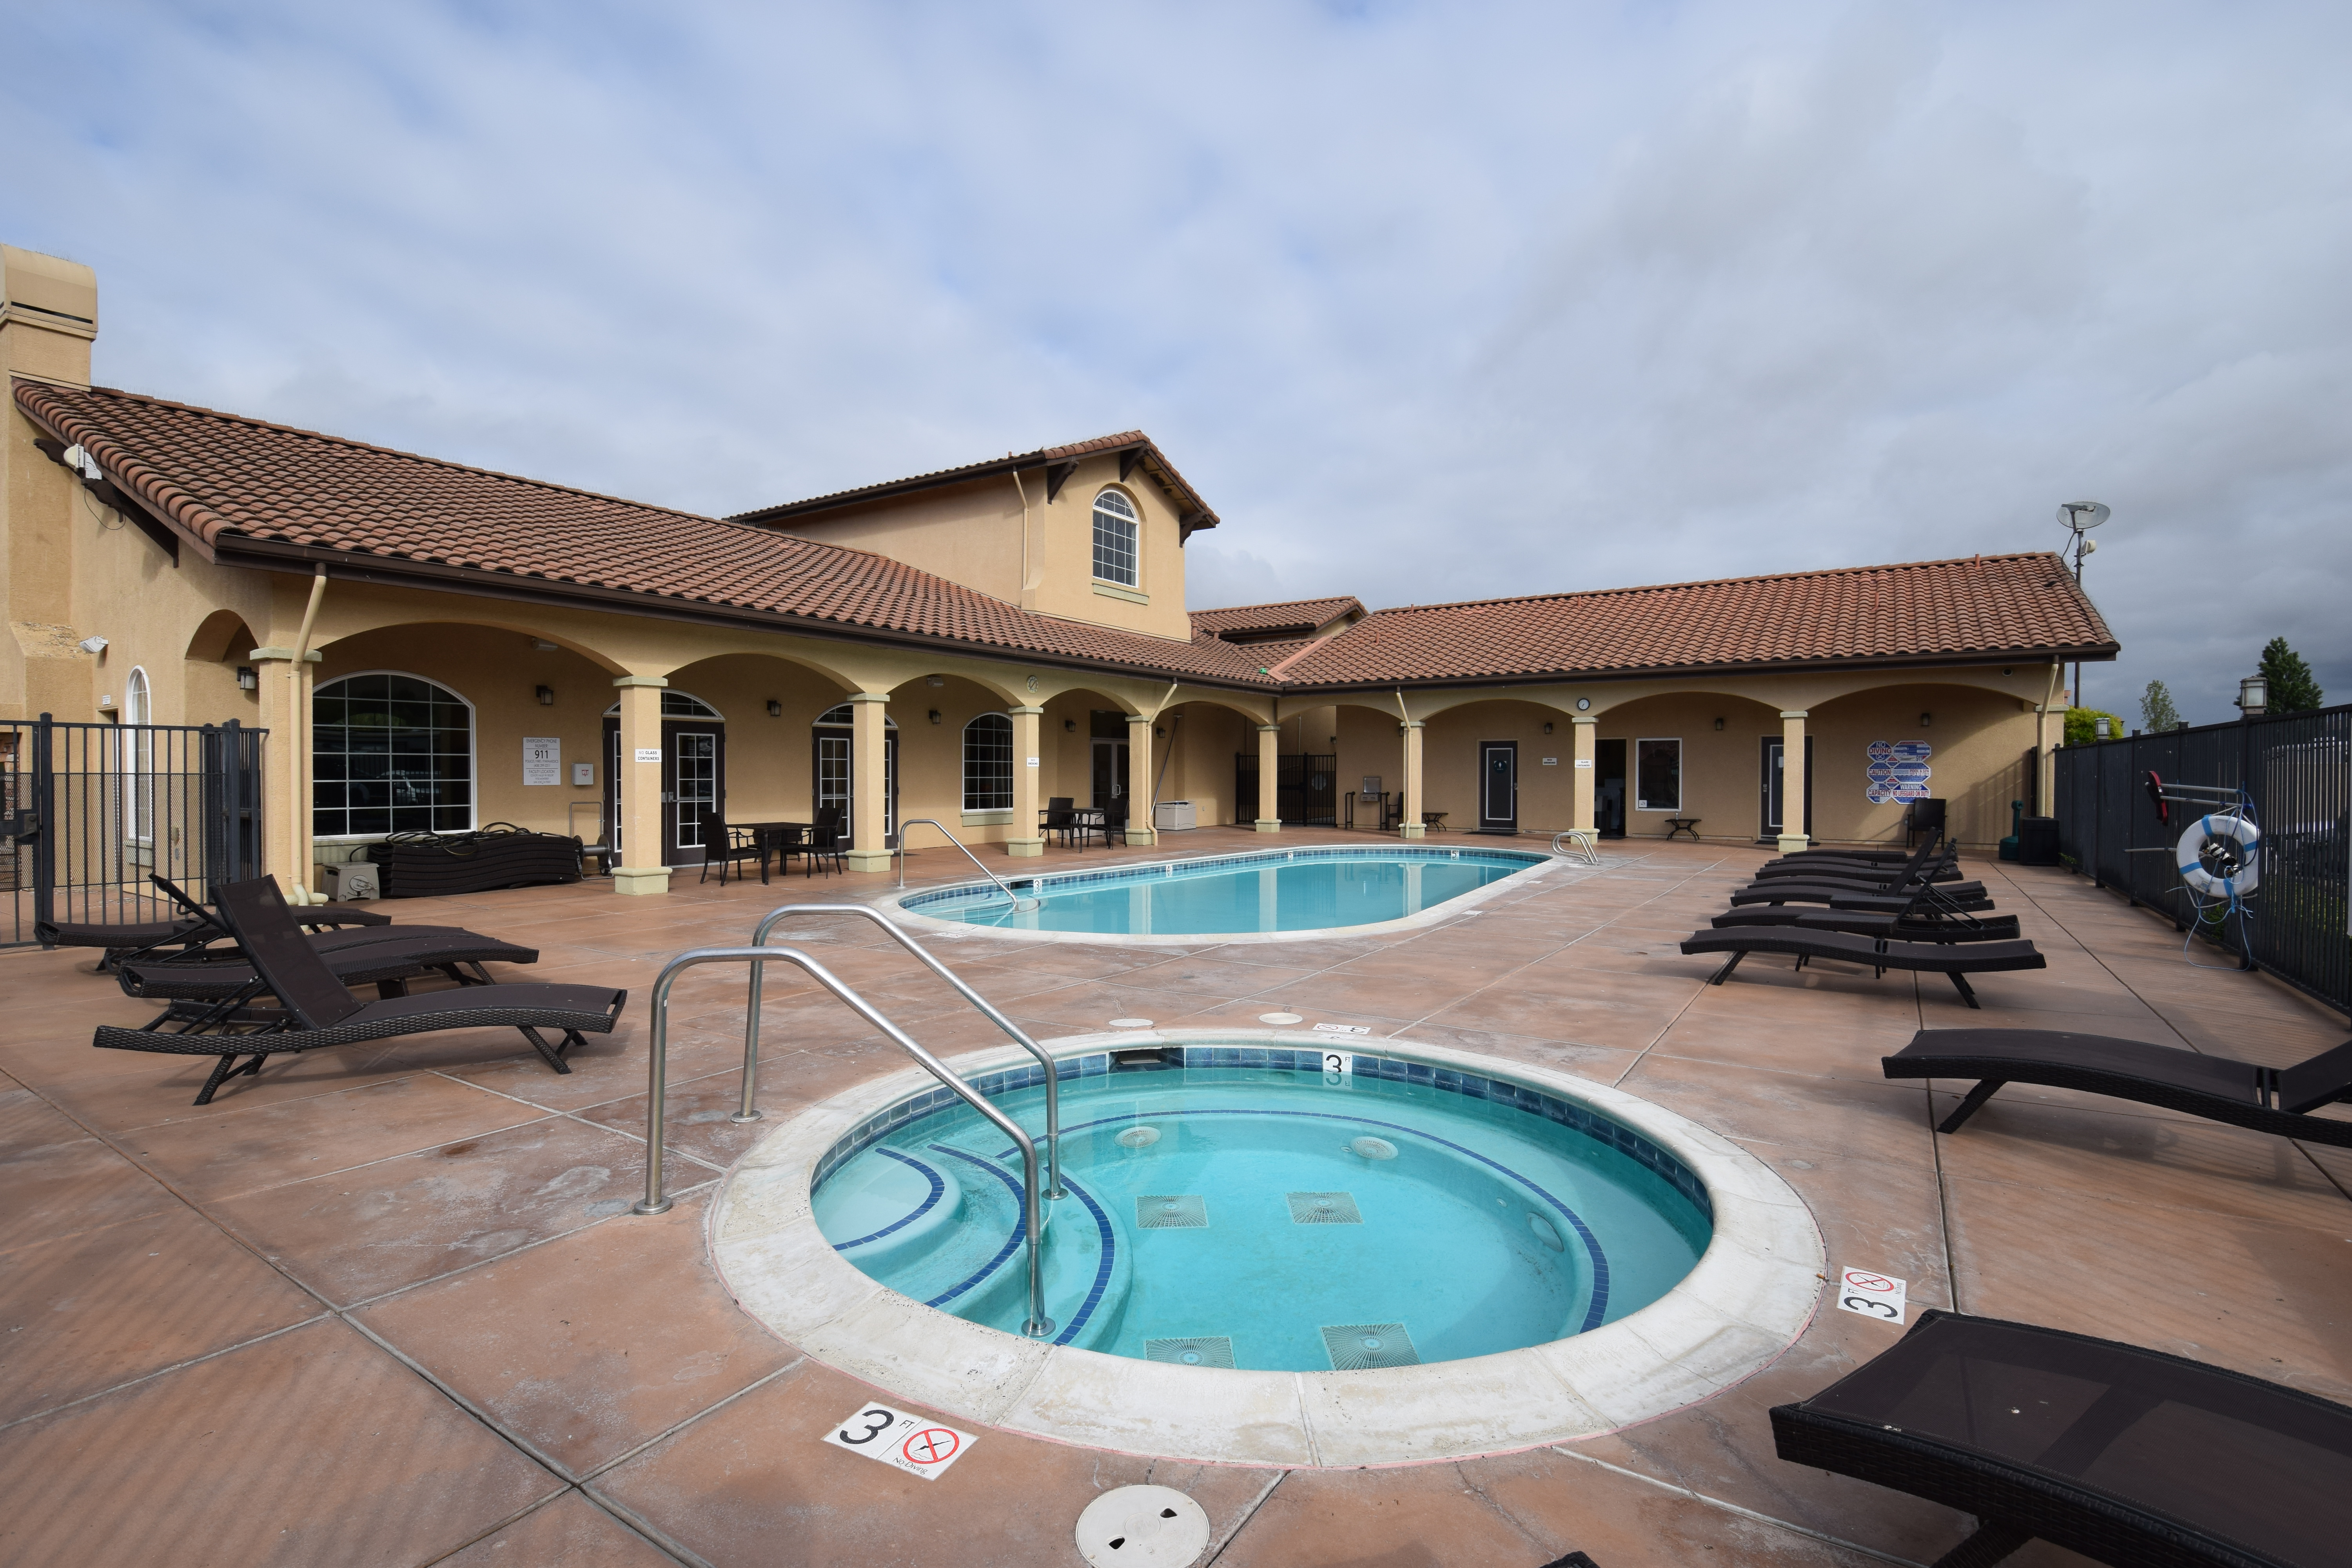 Swimming pool and hot tube with clubhouse nearby.